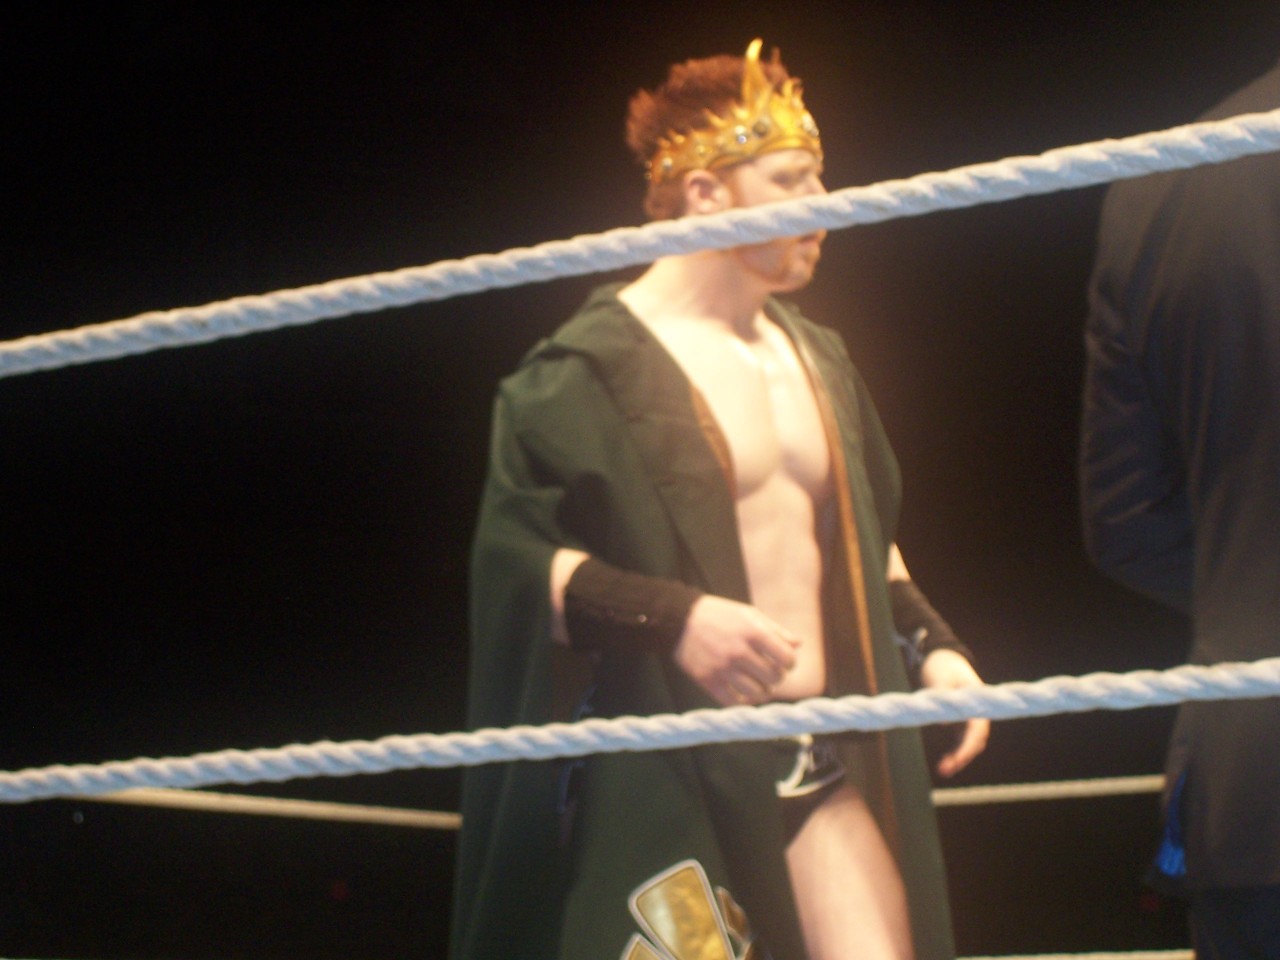 serenitywinchester:  King Sheamus vs John Morrison at a Raw live event in 2011. 